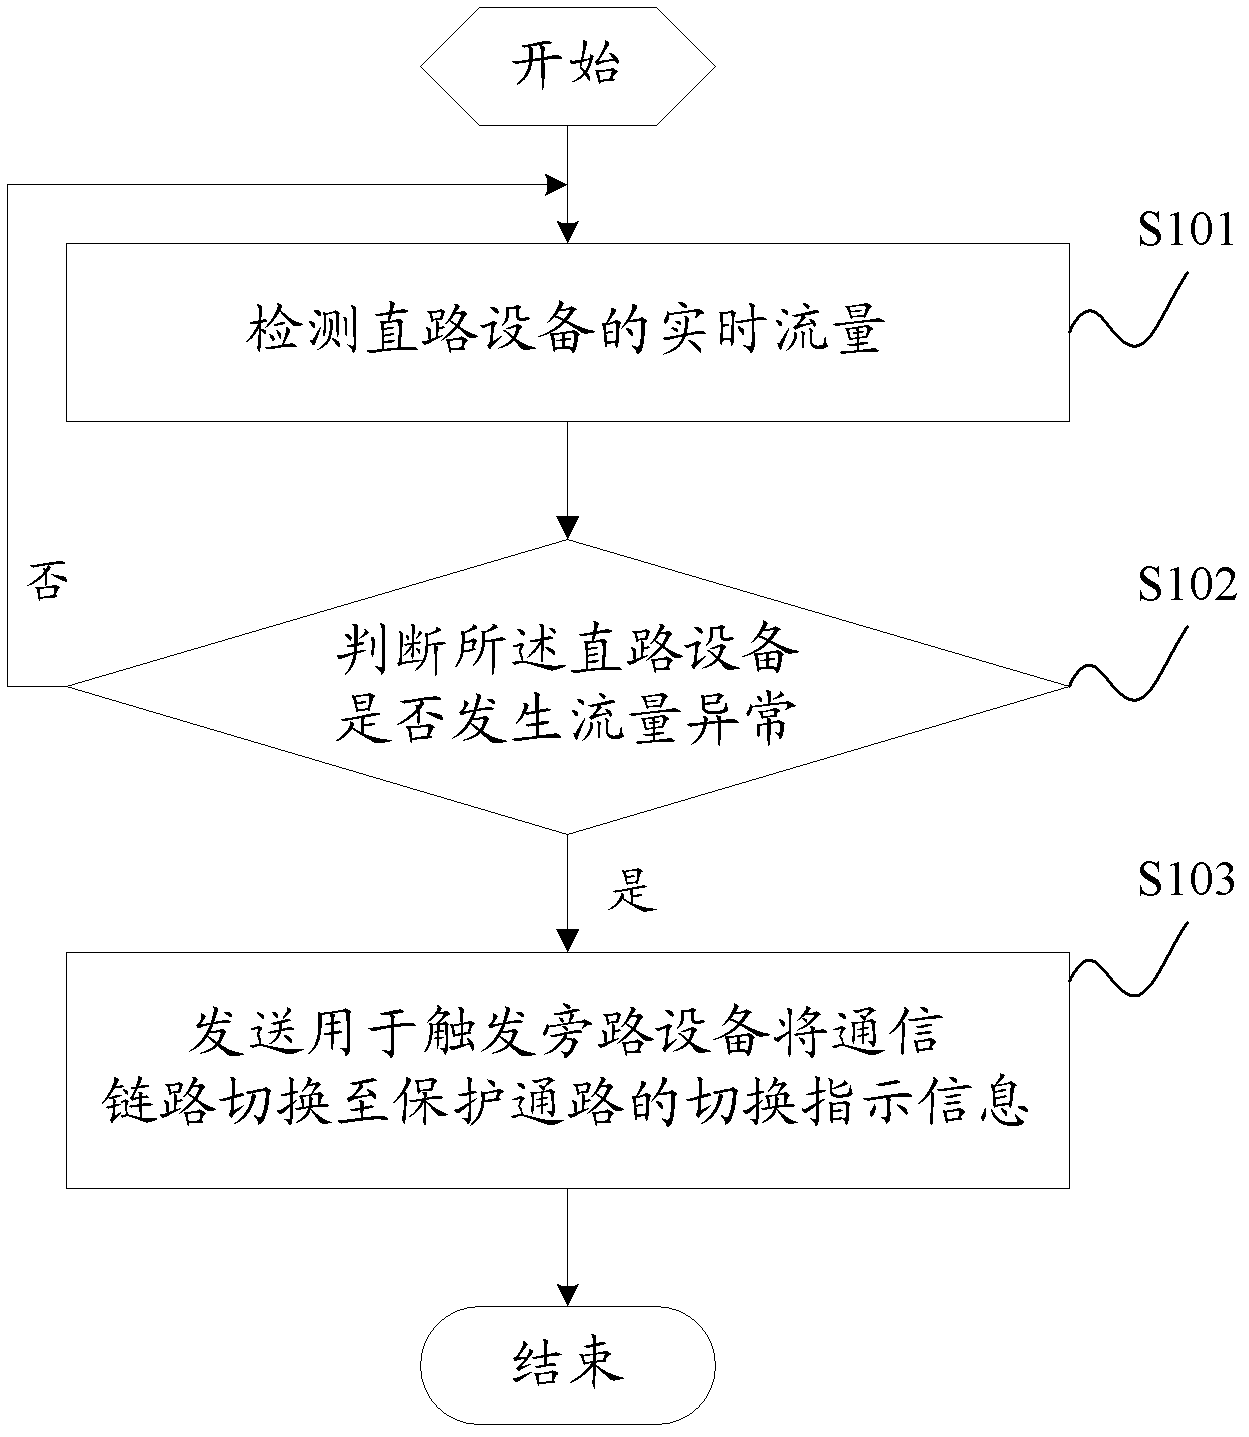 Method for triggering switching of bypass equipment, and method and device for switching bypass equipment